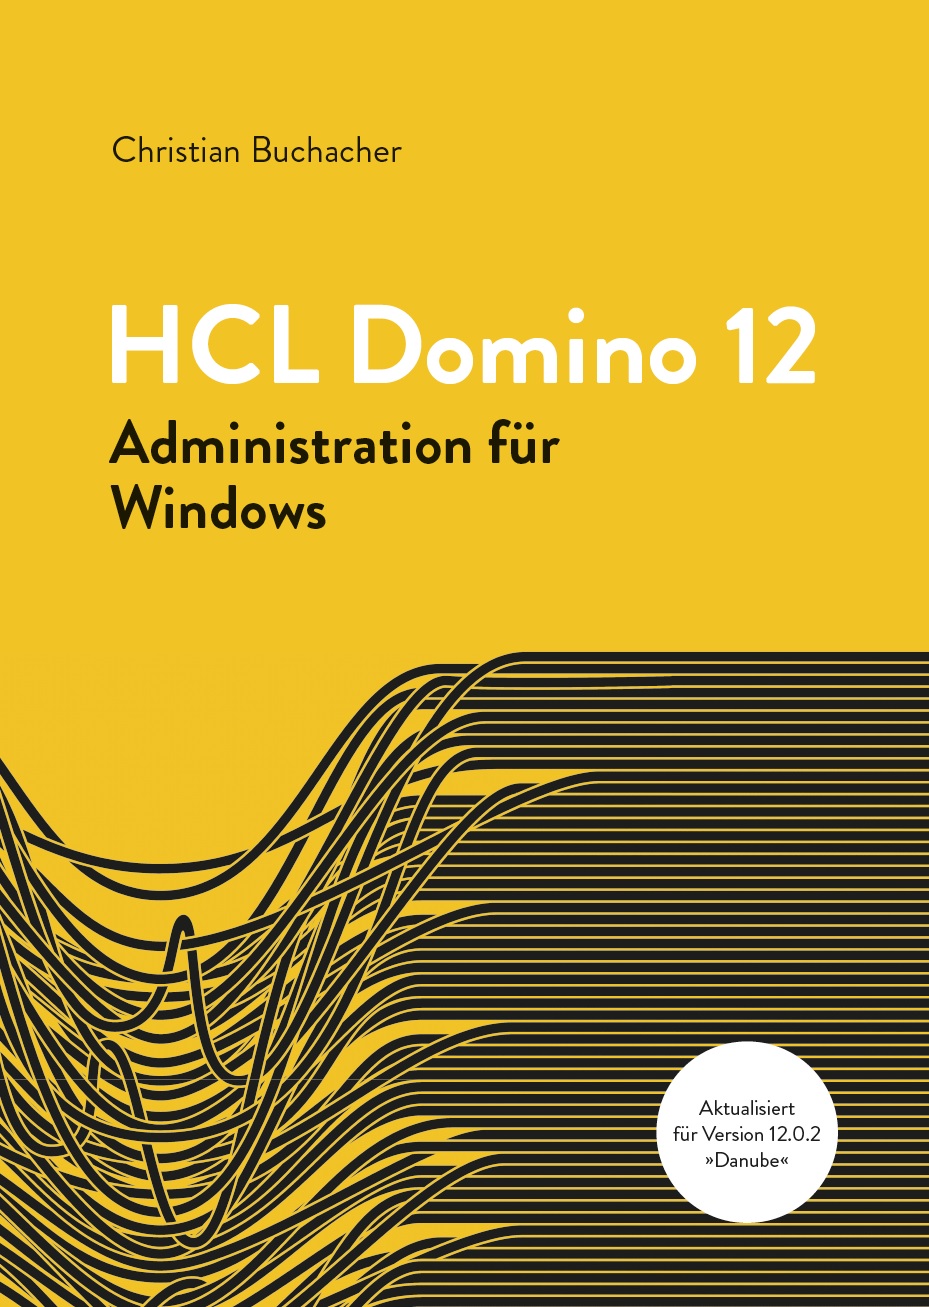 HCL Domino 12